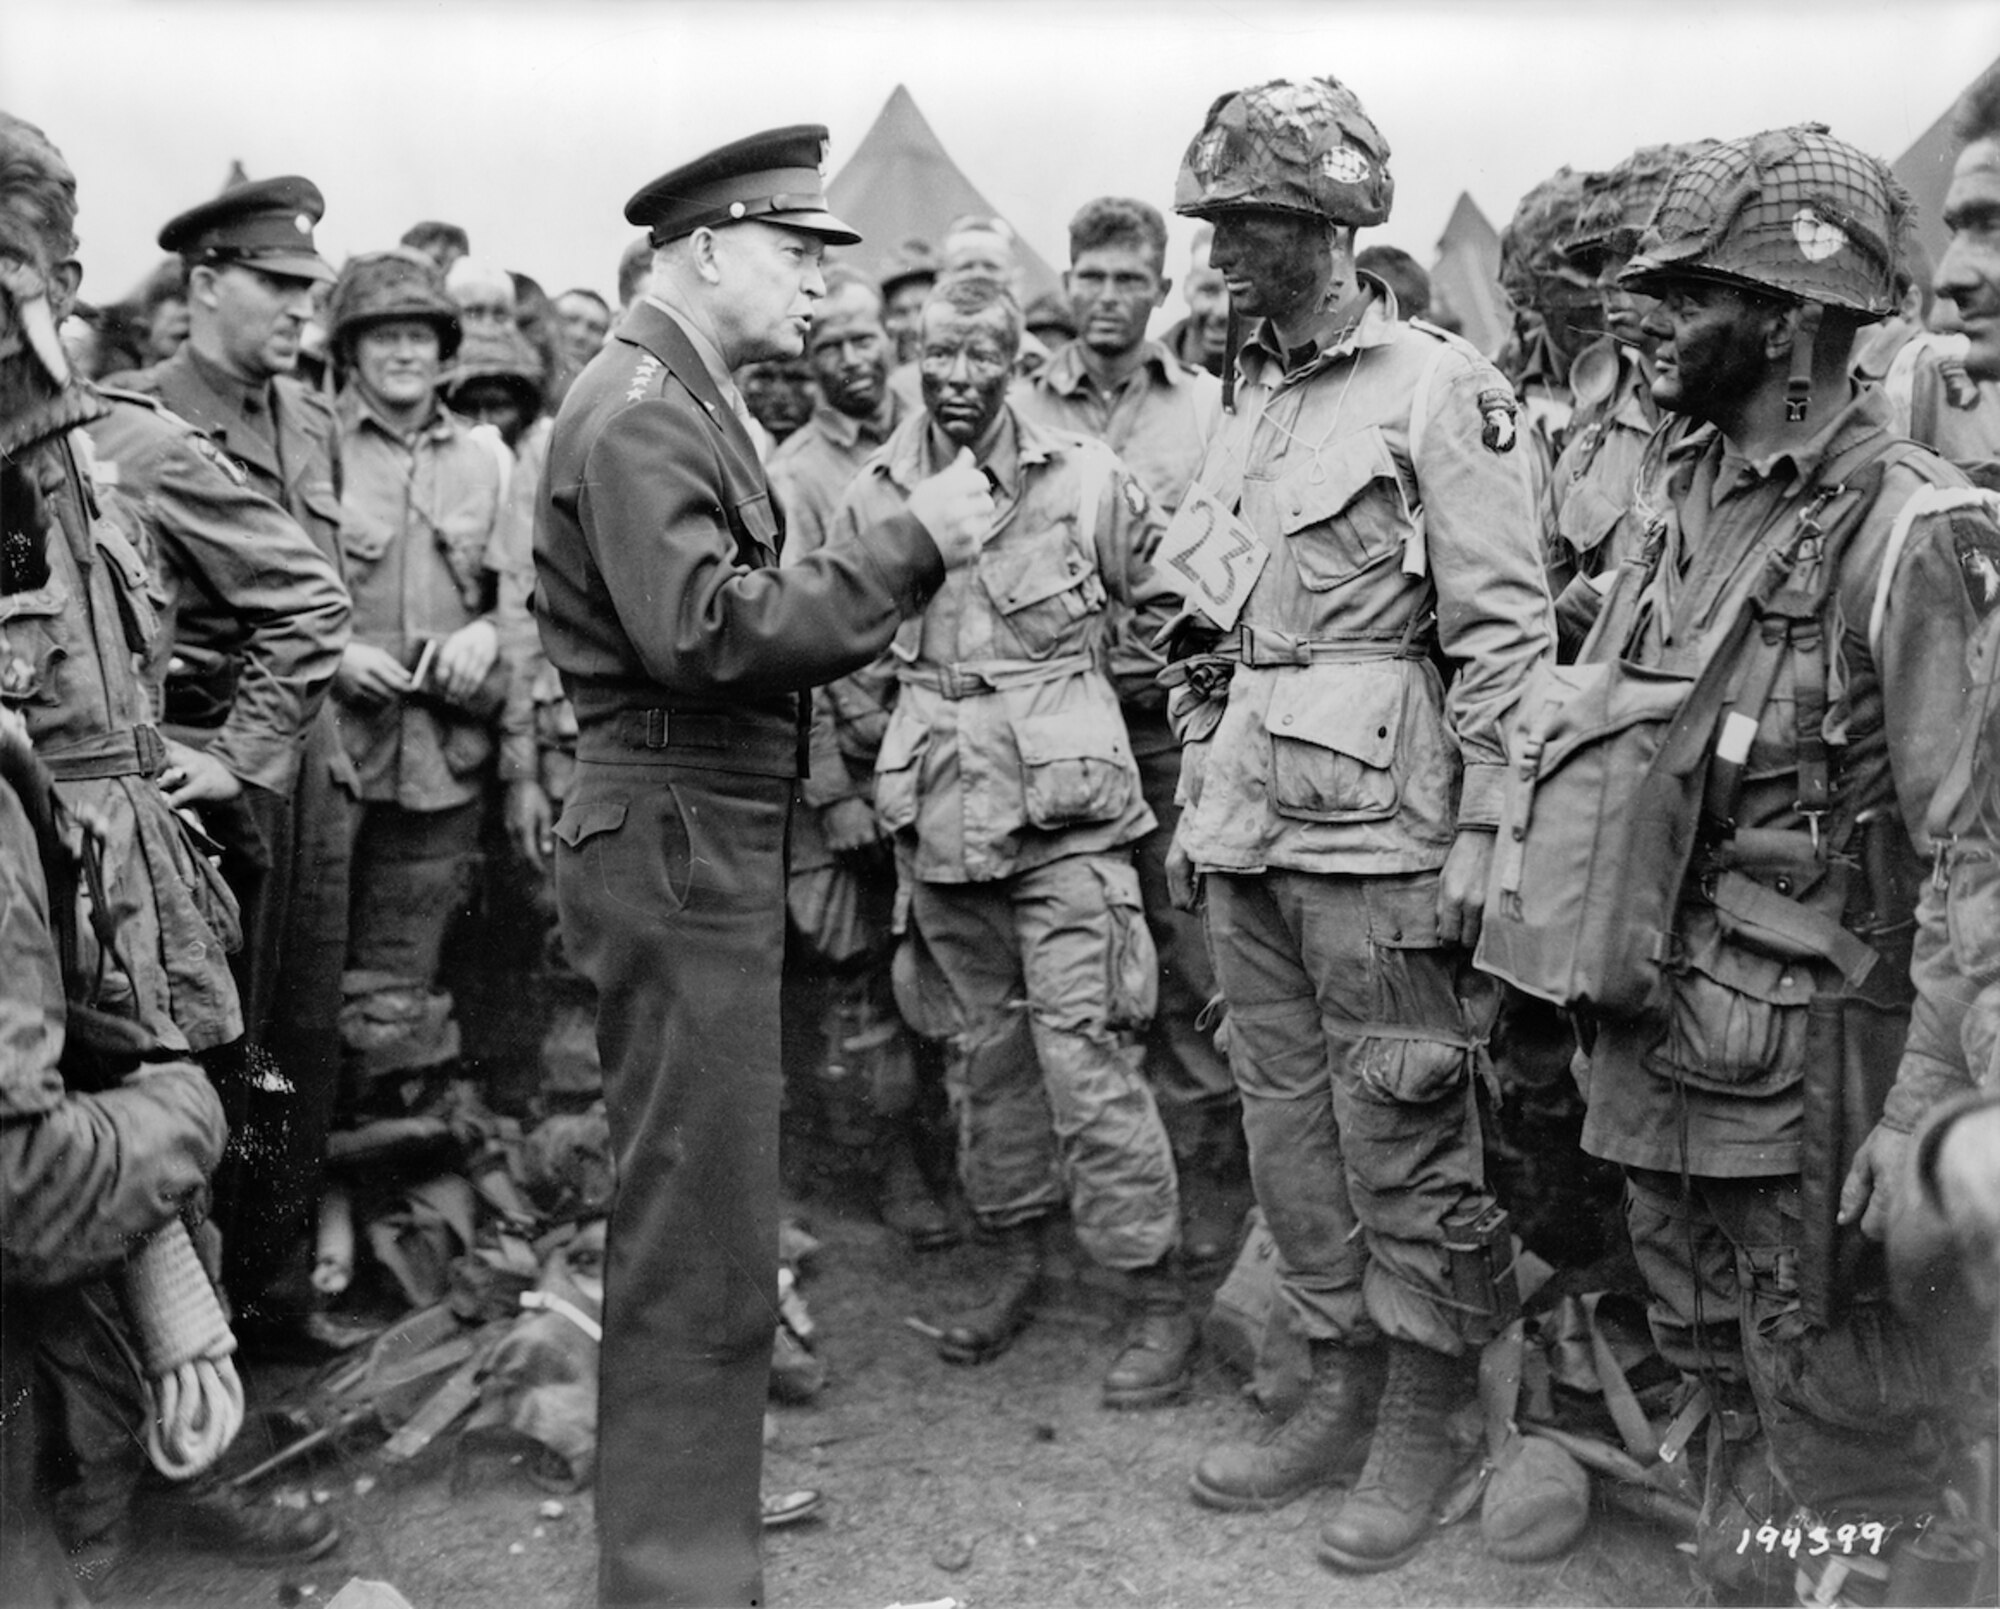 Gen. Dwight D. Eisenhower speaks with members of the 101st Airborne Division at the Royal Air Force Welford Park airfield, England, June 5, 1944. Eisenhower and Winston Churchill visited RAF Welford the night before D Day Operation Overlord during World War II. (Courtesy photo)